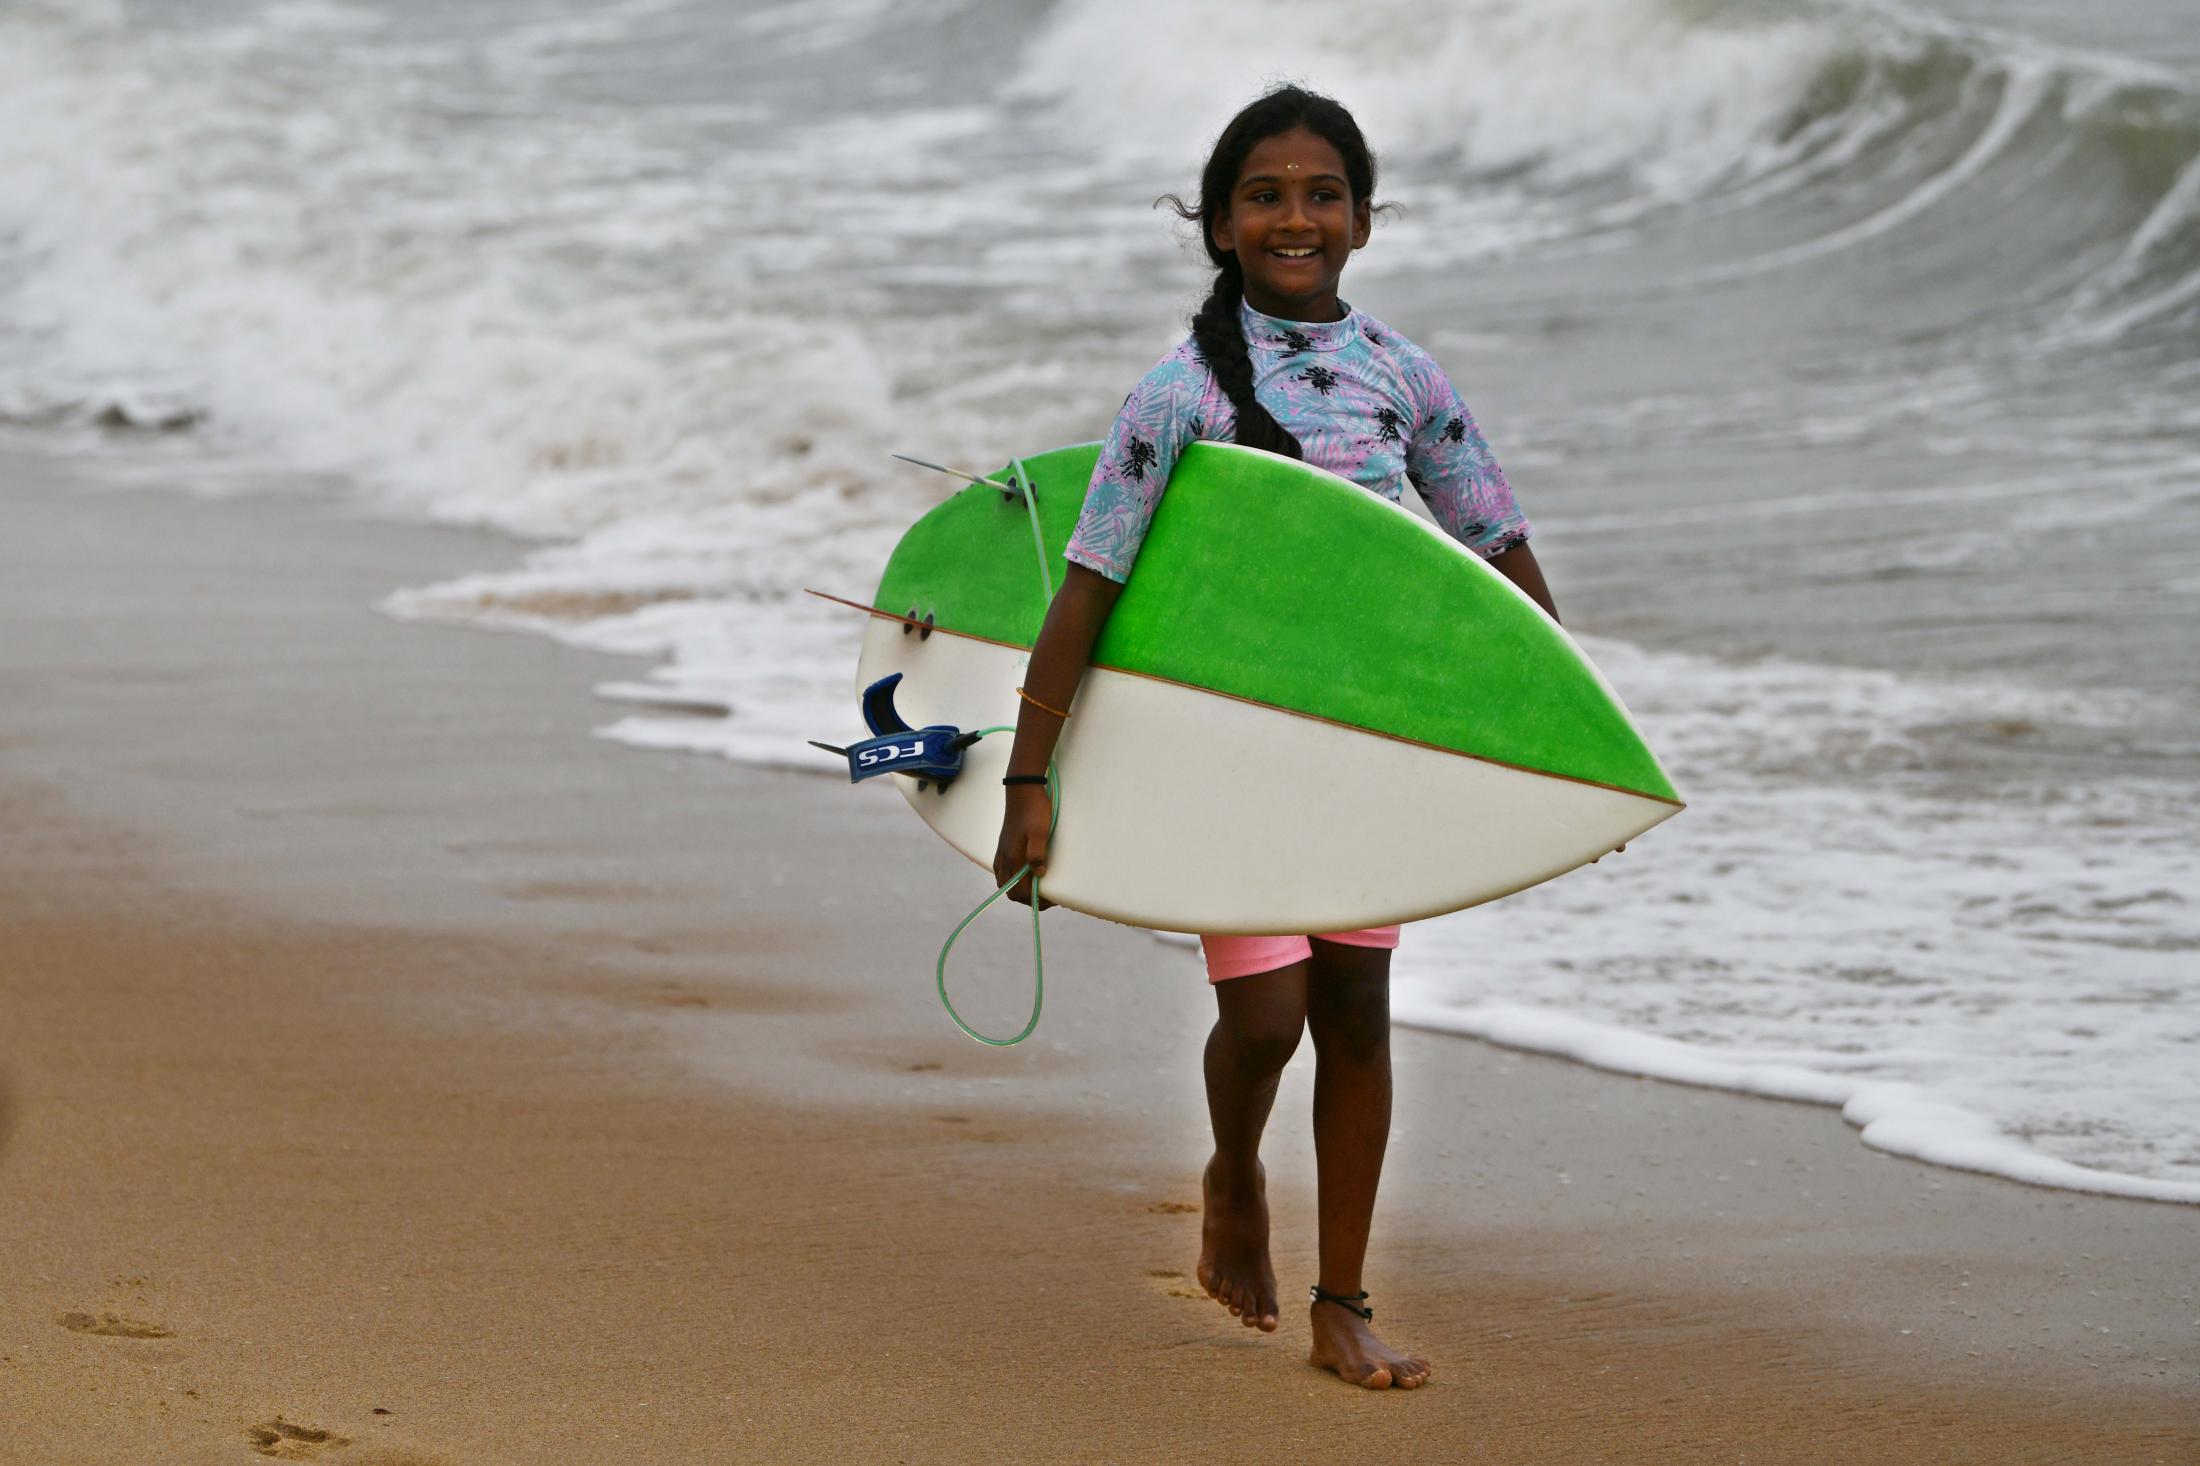 Kamali &ndash; (11) Is the only girl in town who skates and surfs. She started when she was eight and trains under her uncle Santosh who is a first-generation surfer. Even as a child, one could not contain the girl from getting to the sea. When her uncle isn&rsquo;t surfing, she sits on the beach playing with dogs and watching other surfers. She said &ndash; &ldquo;When I grow up one of the many things, I wish to do is be a veterinarian.&rdquo; Her brother Harish started when he was three years old. Generations are started younger.